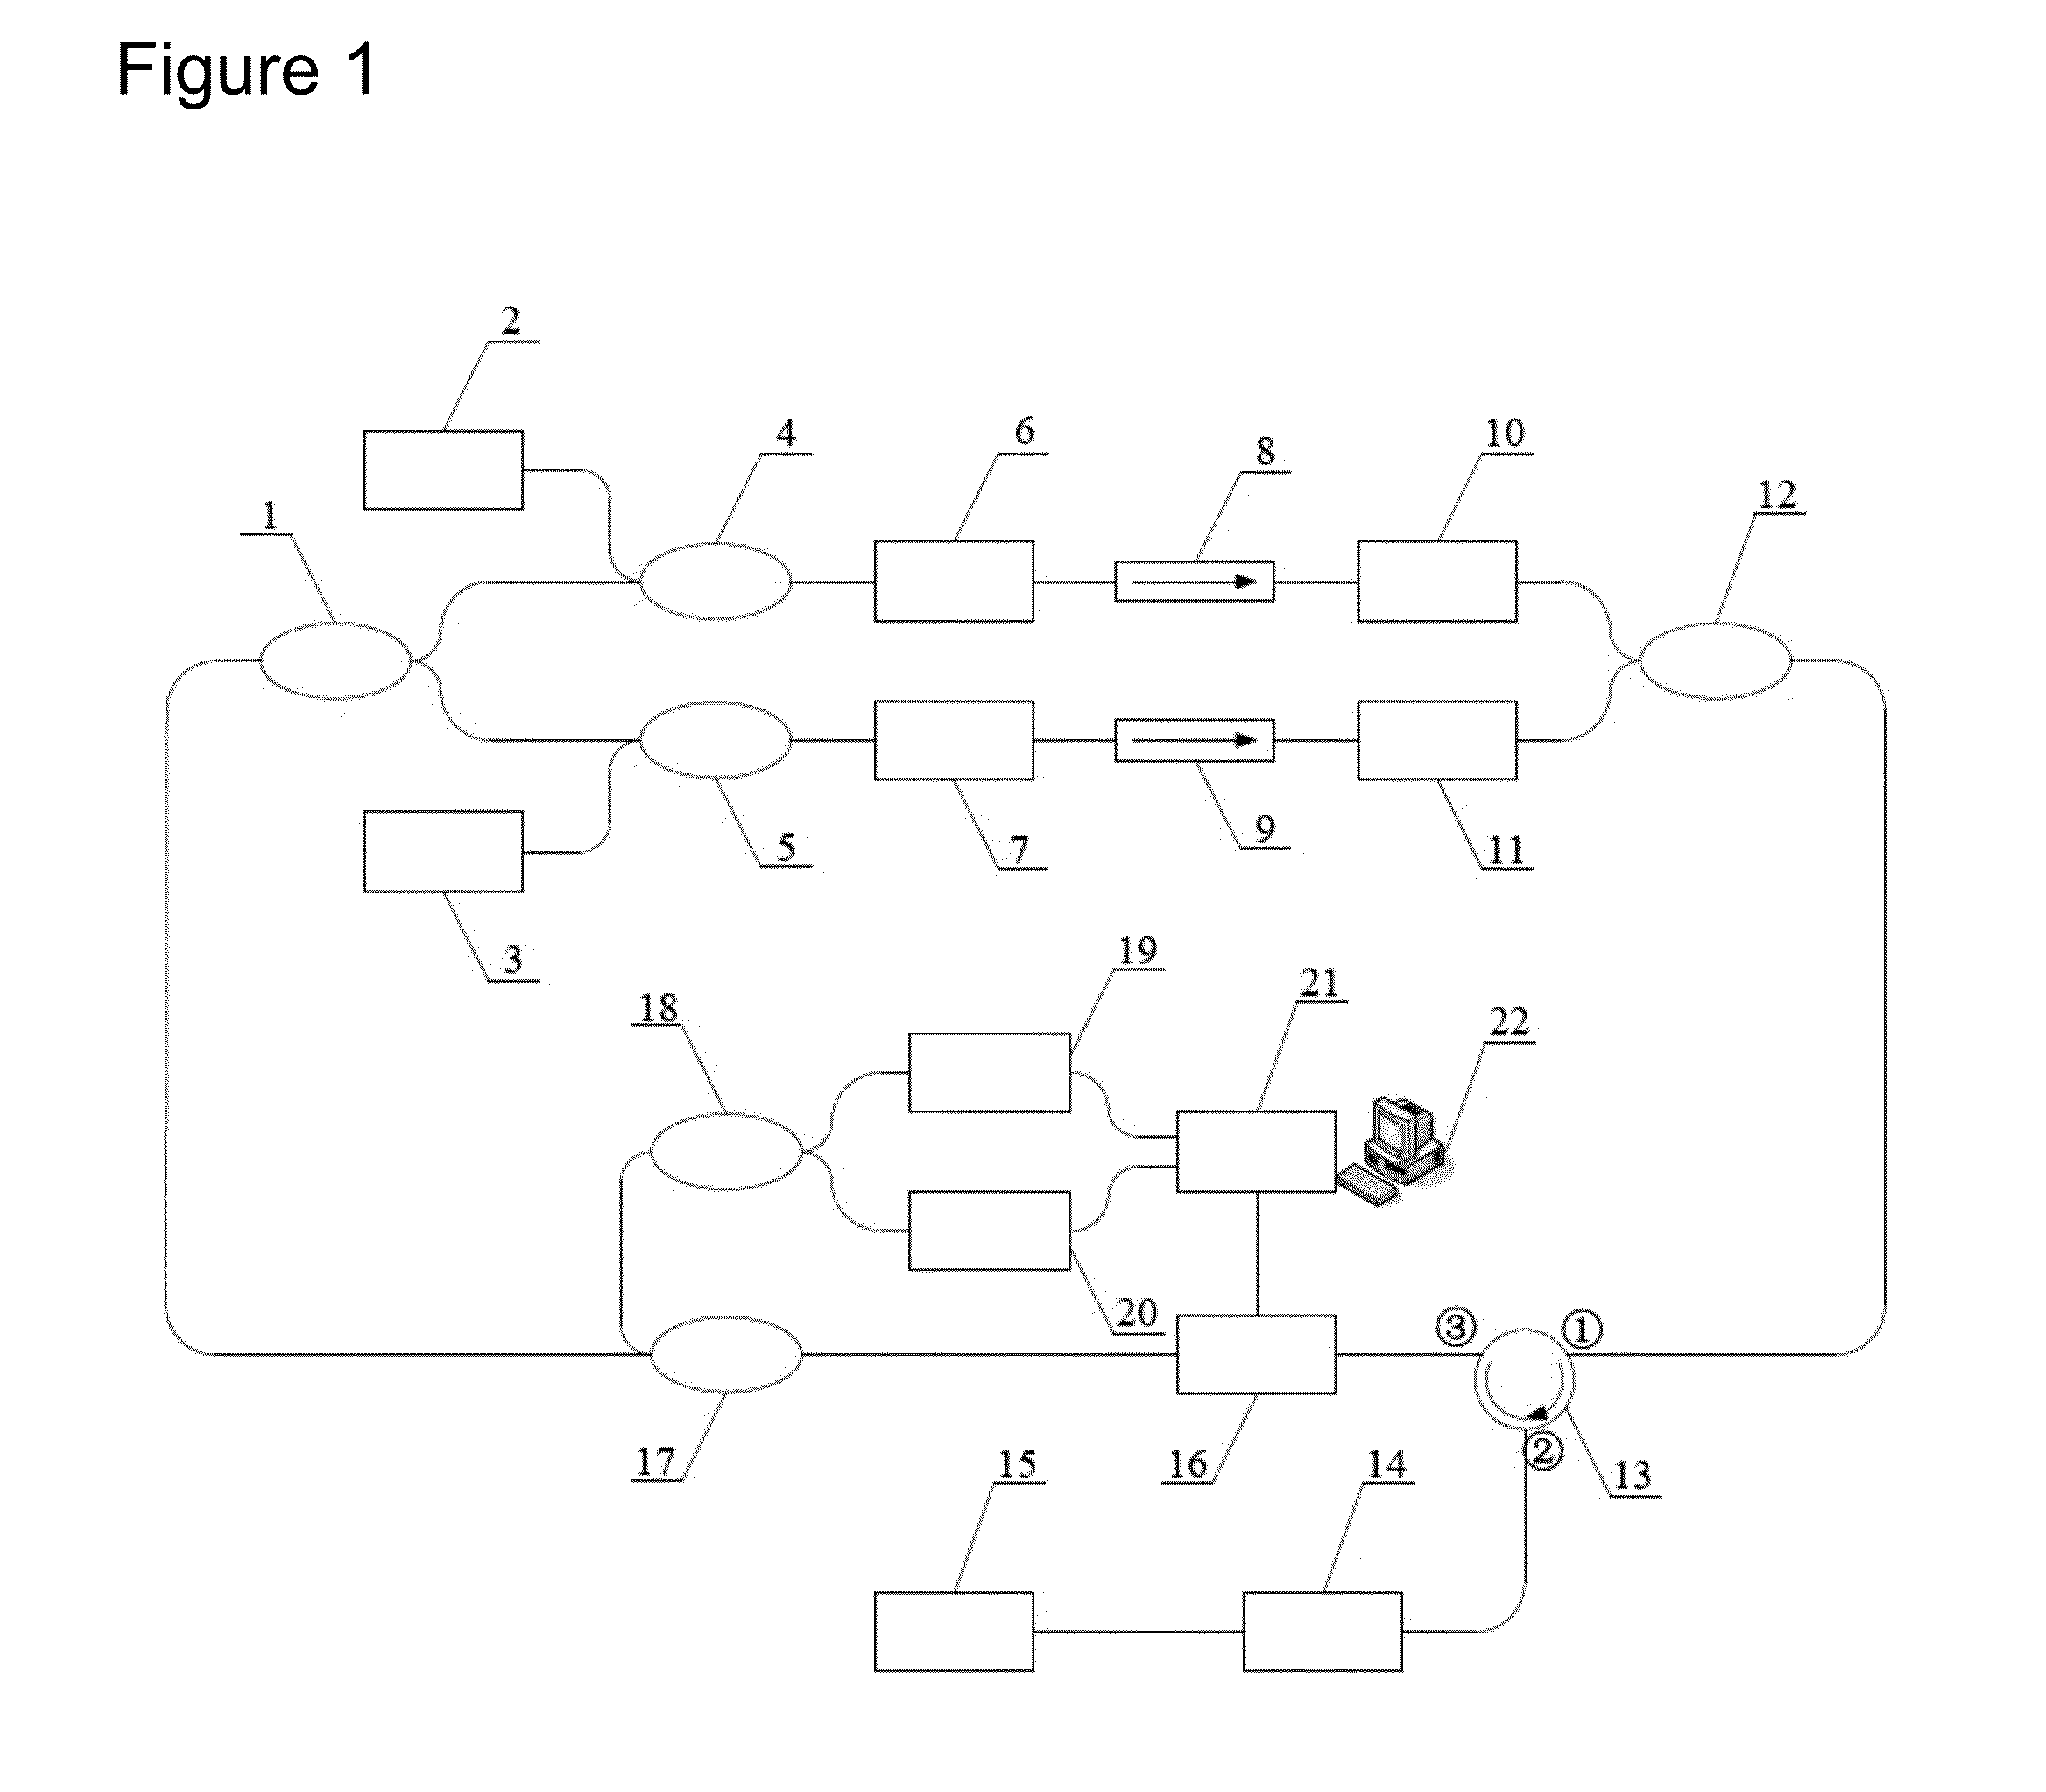 Multi-band multiplexing intra-cavity gas sensing system and method